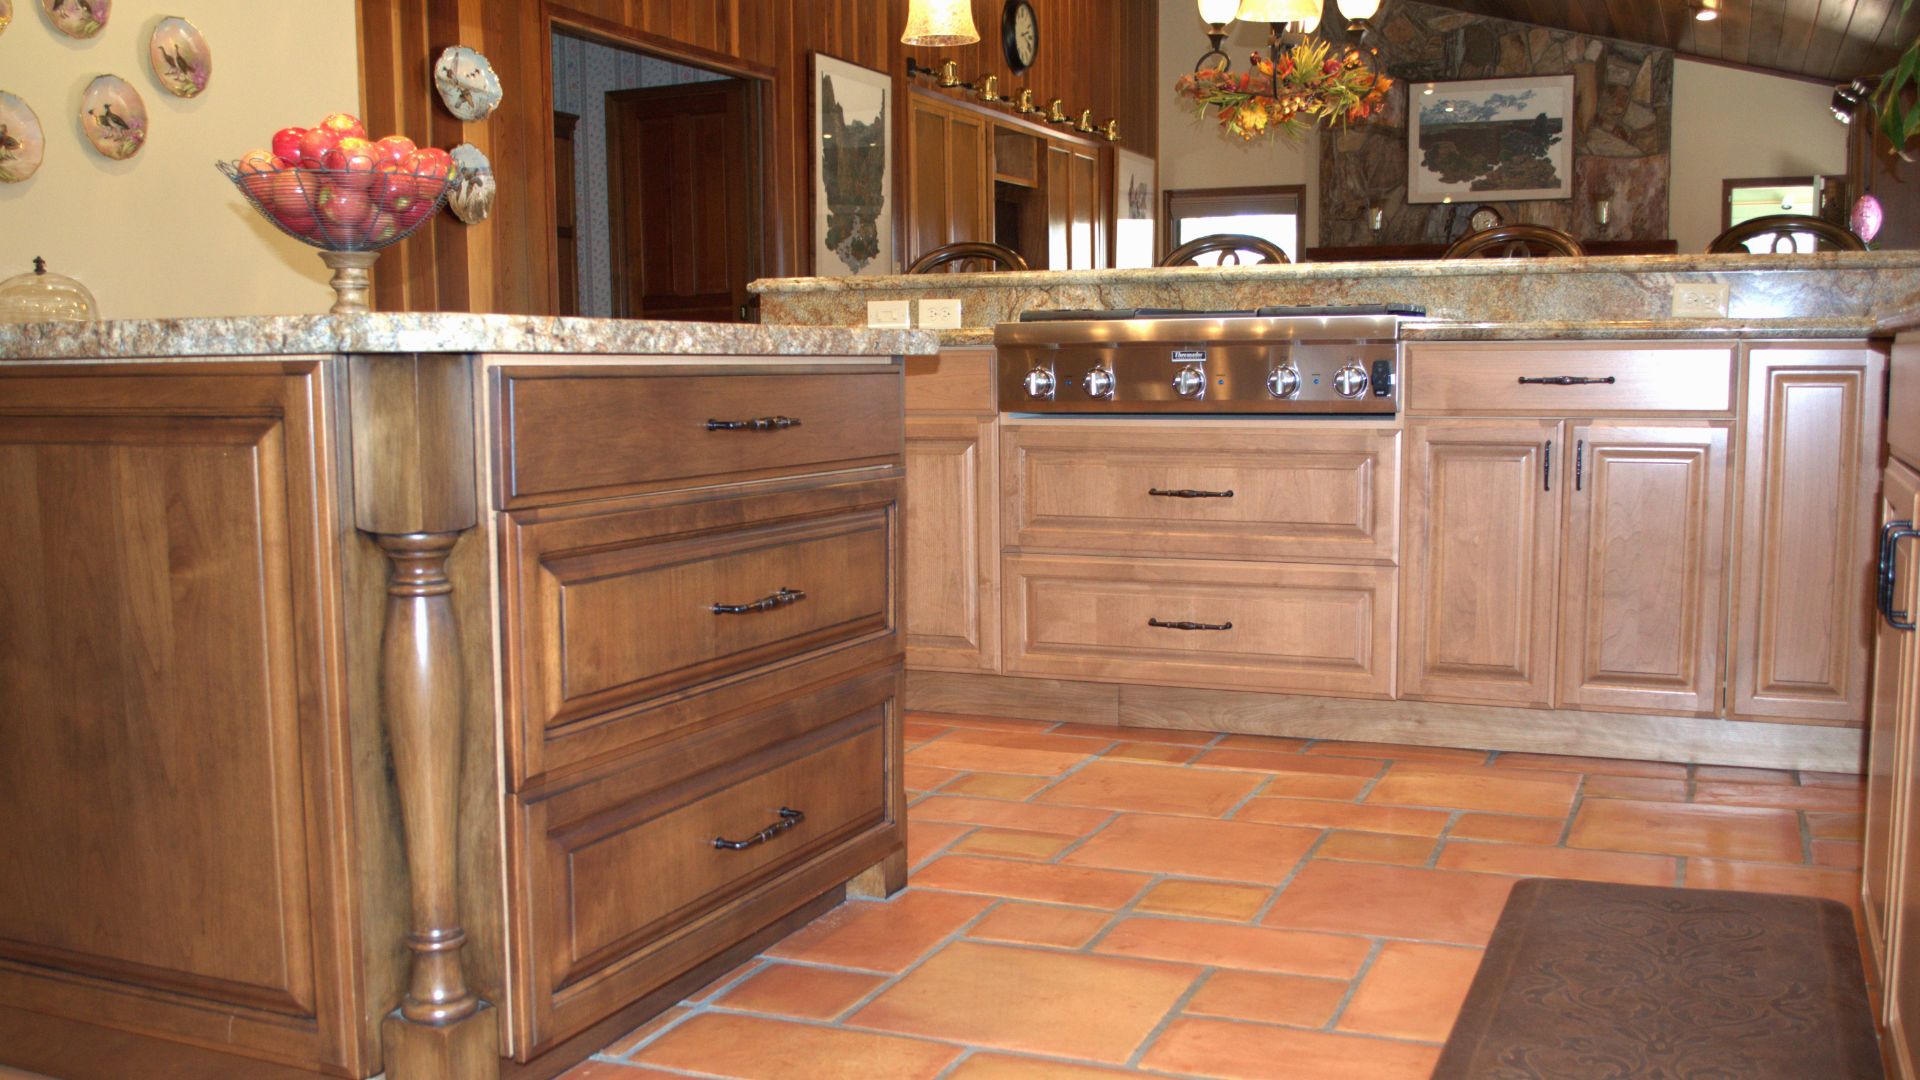 example of kitchen remodel performed by high caliber construction